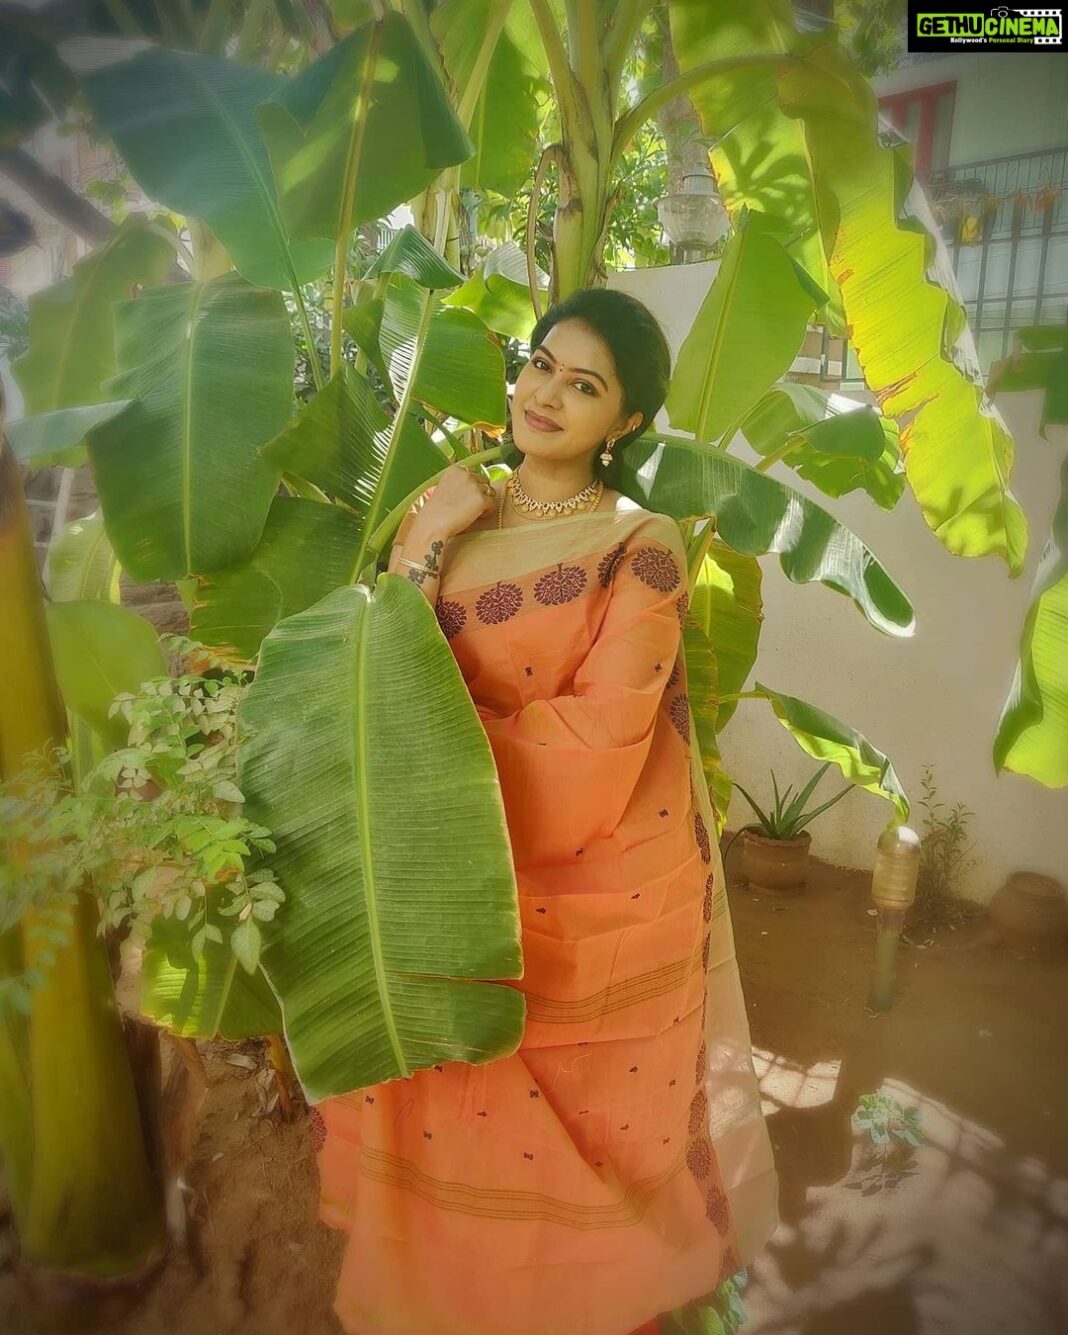 Rachitha Mahalakshmi Instagram - My al time fav pose with a banana leaf 🍃🙊🥰🥰🥰🥰🥰🥰🥰😁 Last set of pic took at NP shoot 🙆🏼‍♀️ Lovely Chettinad sarees 🥰🥰🥰🥰🥰 Saree love @digambara_collections 👈👈 who was constant sponsorer for NP 😇🙌 Jewelry @tsquarecollection.in 😇😇😇 #supportwomenentrepreneurs🙋🏼💪🏻 #supportsmallbusiness 😇😇😇😇😇